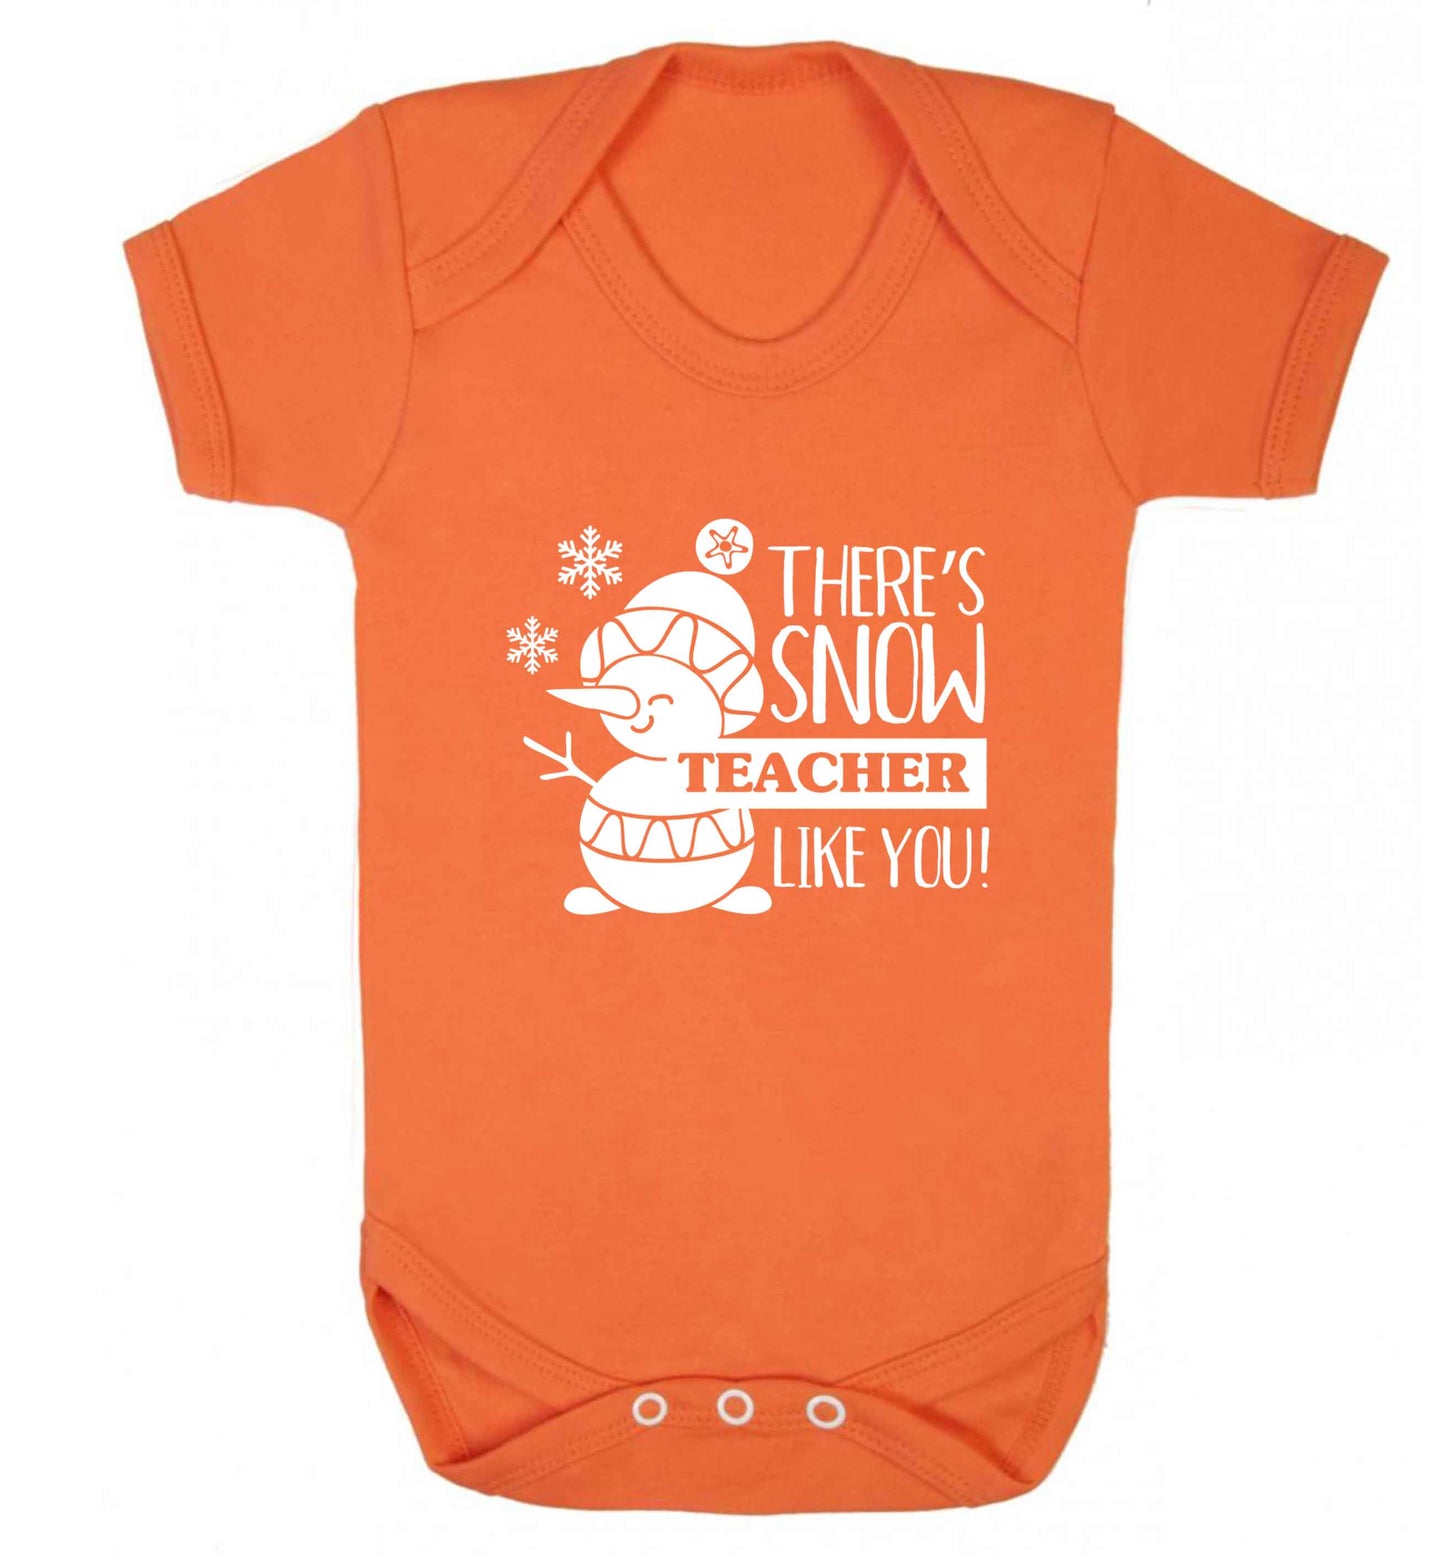 There's snow teacher like you baby vest orange 18-24 months